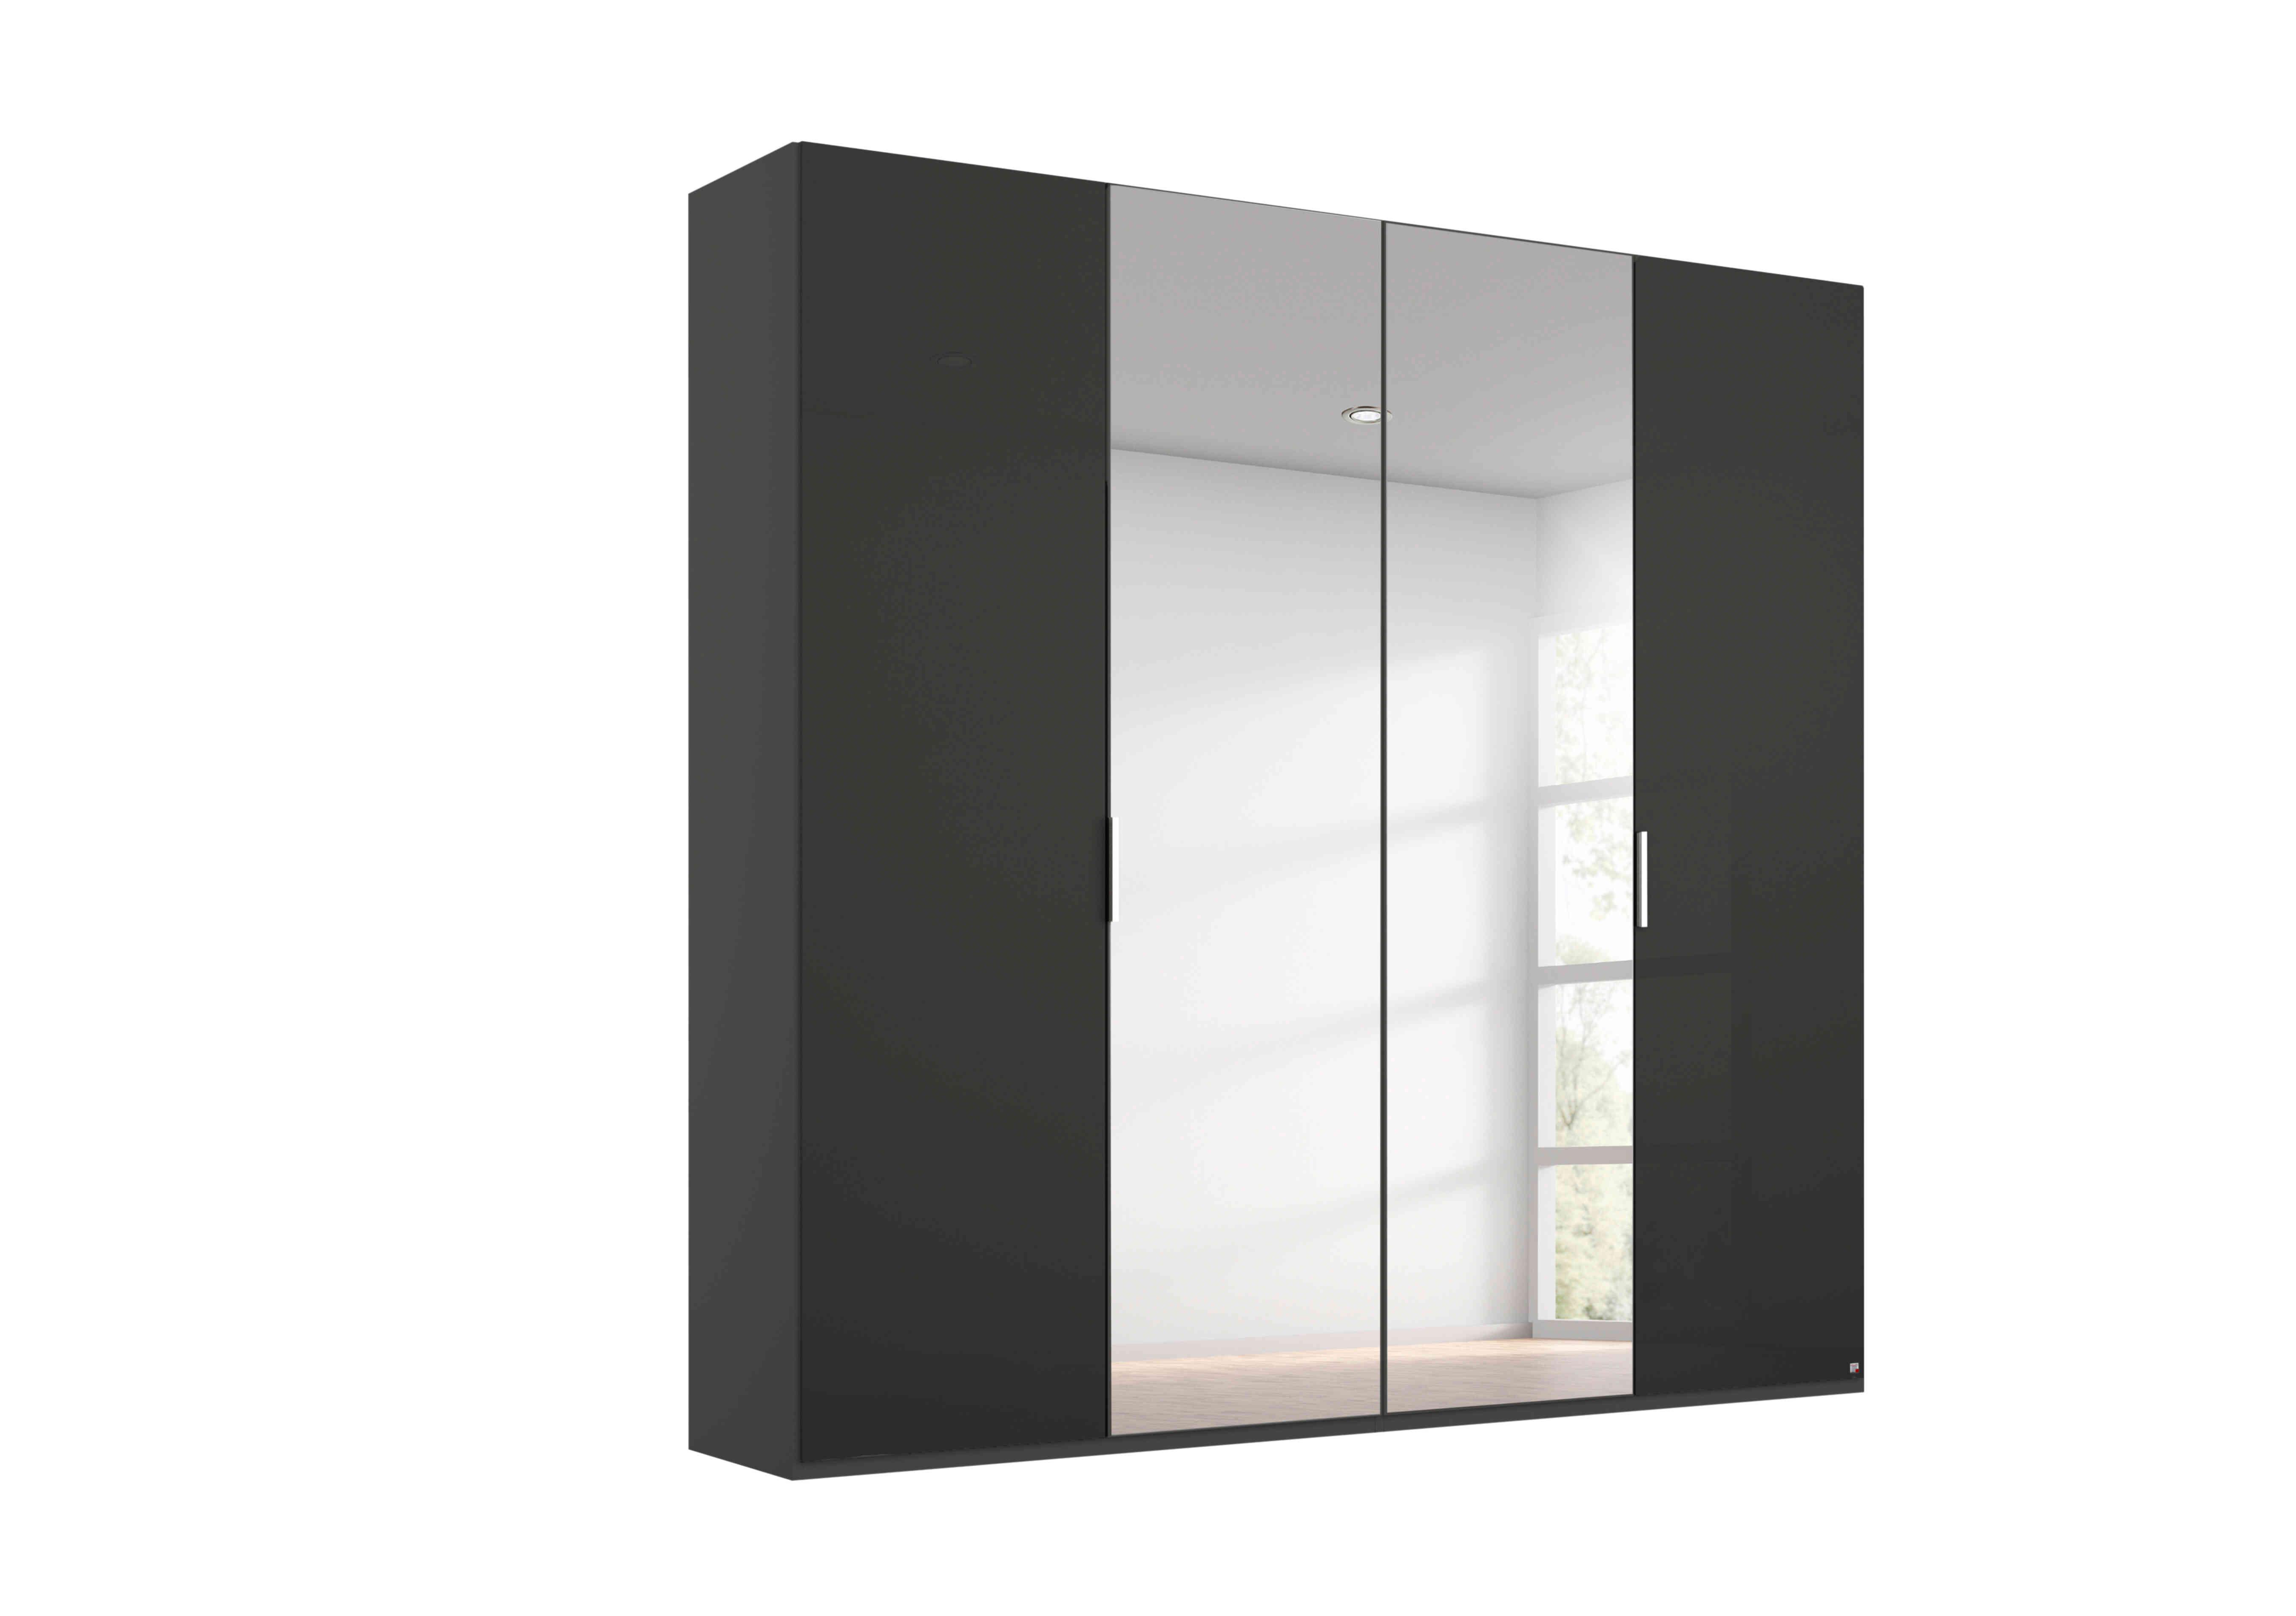 Formes 4 Door Hinged Wardrobe with 2 Glass Doors and 2 Mirrored Doors in A140b Graphite Basalt Front on Furniture Village